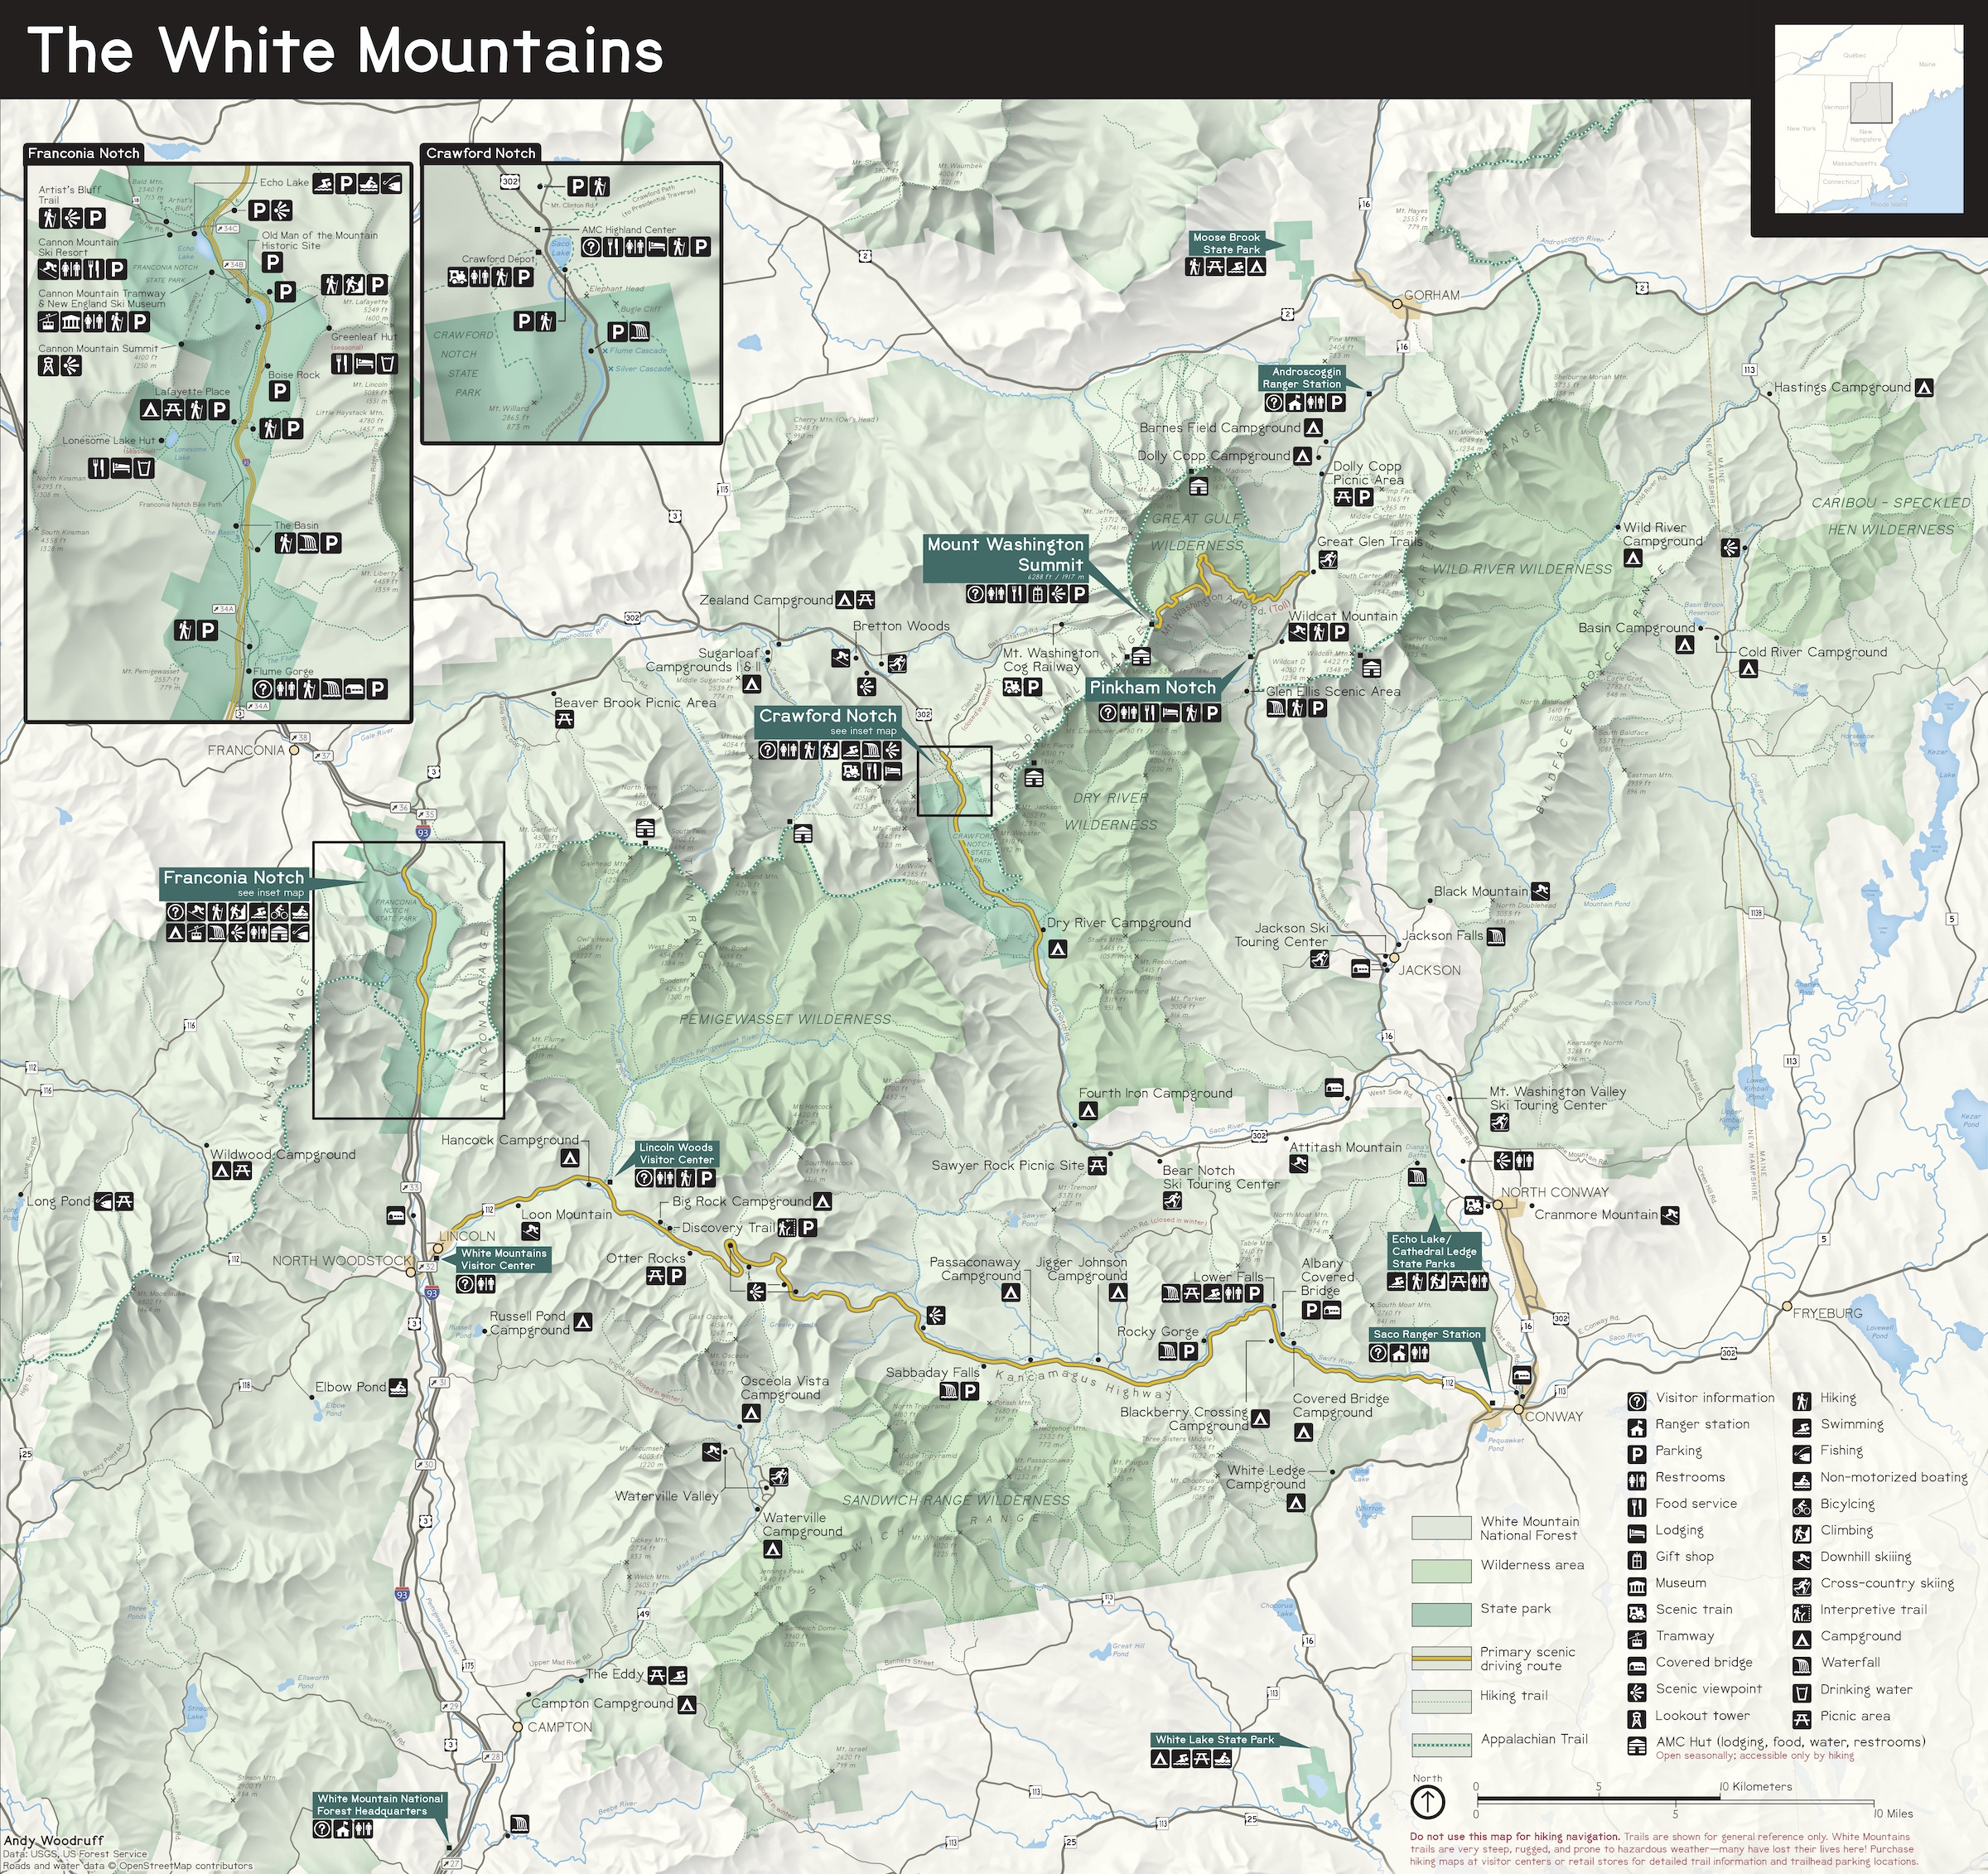 Full map of the White Mountains